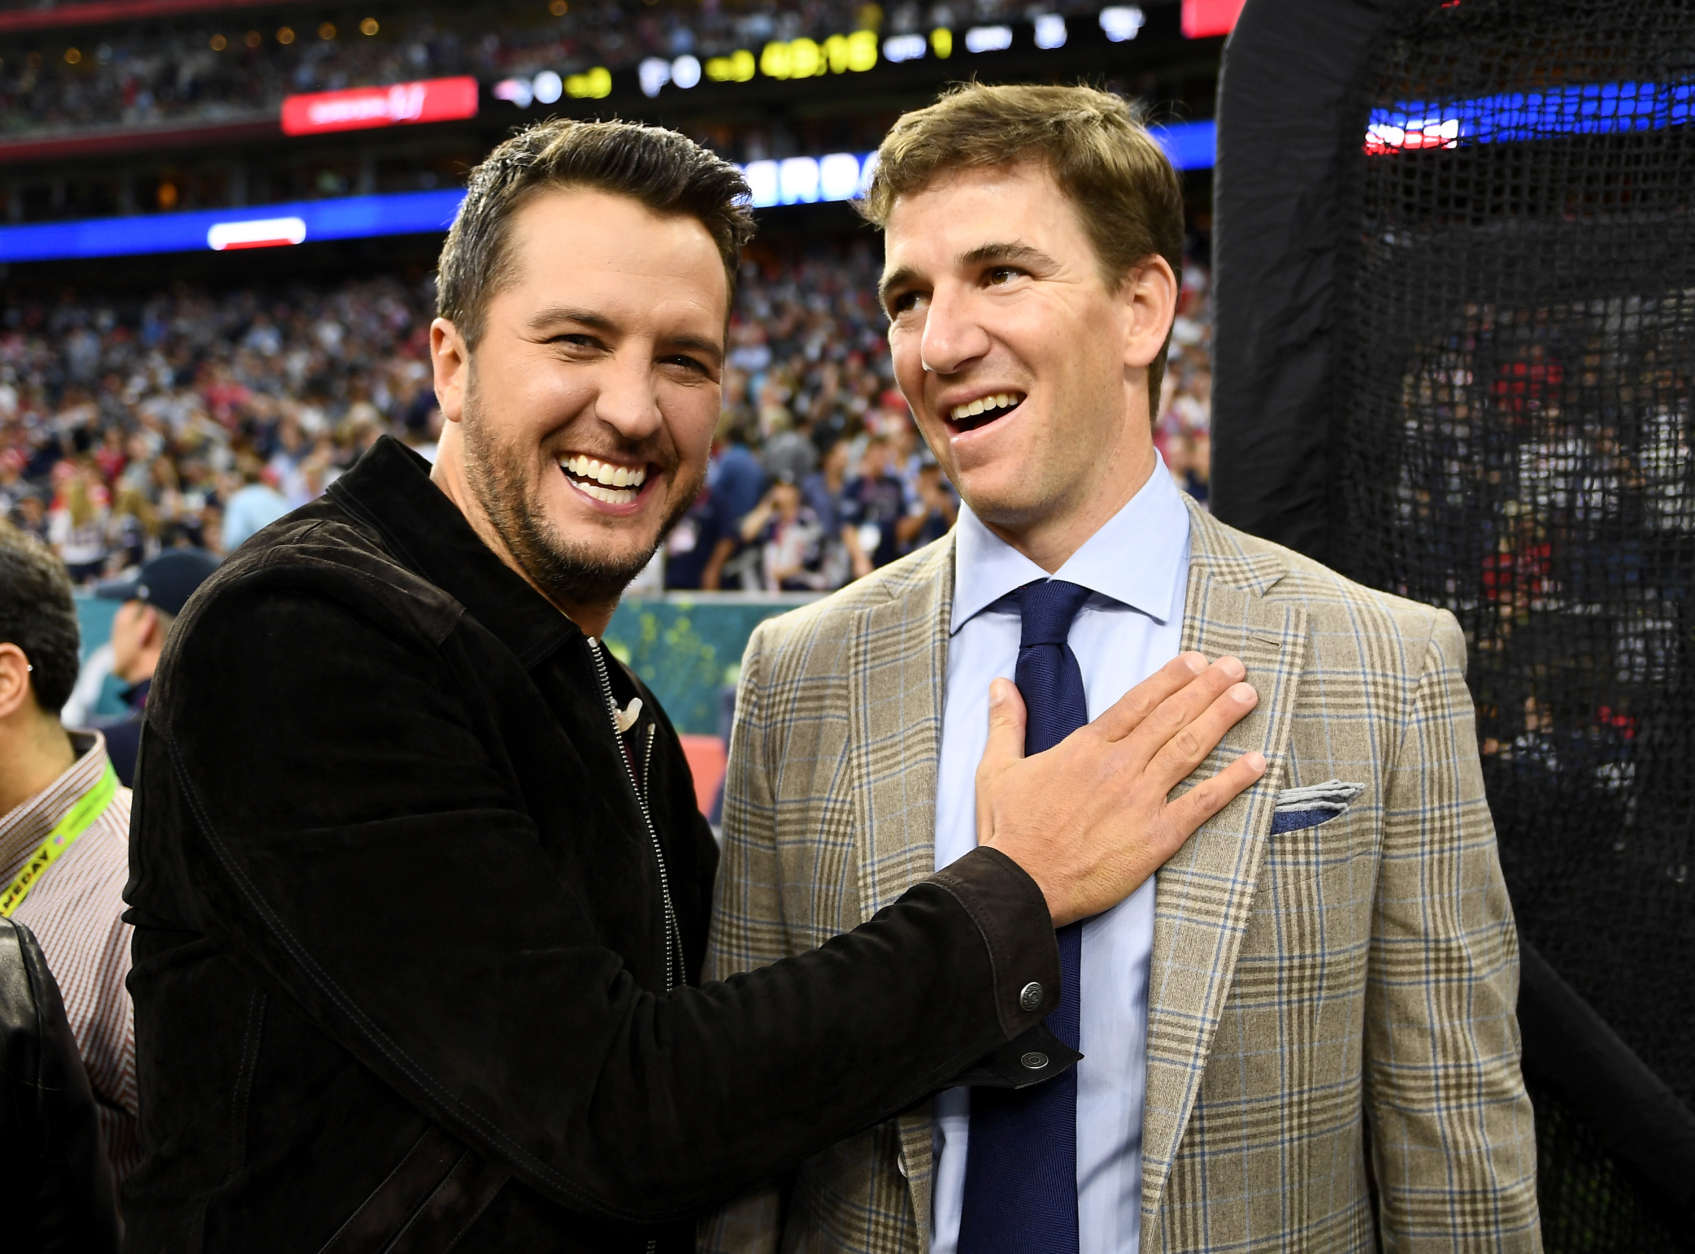 HOUSTON, TX - FEBRUARY 05:  Musician Luke Bryan and NFL player Eli Manning attend Super Bowl LI at NRG Stadium on February 5, 2017 in Houston, Texas.  (Photo by Larry Busacca/Getty Images)